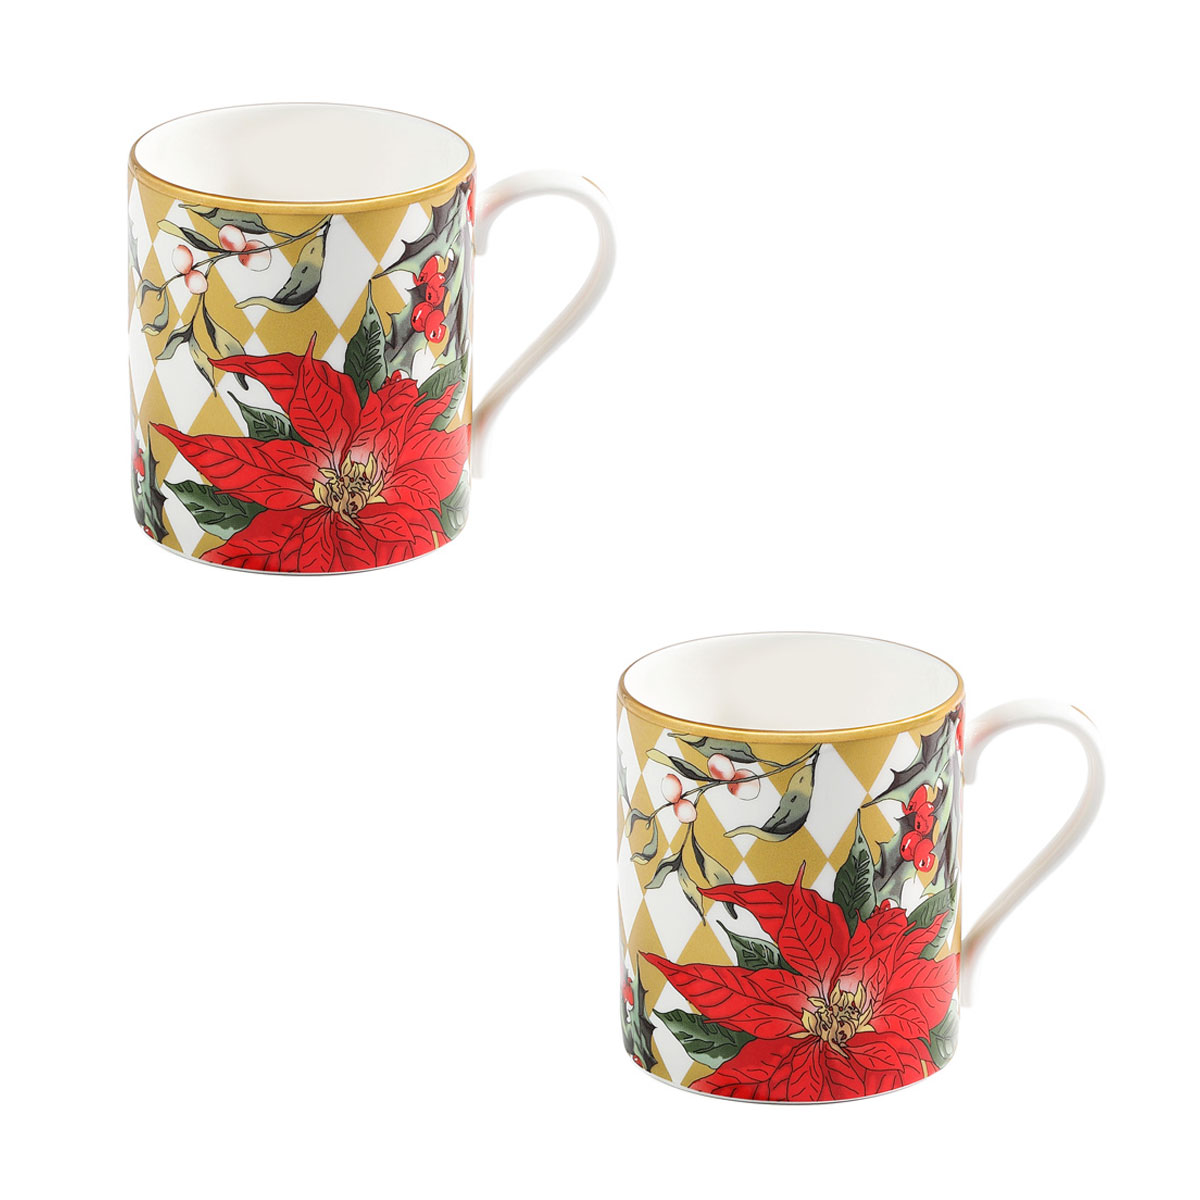 Halcyon Days Parterre Gold with Poinsettia Mug Set of 2